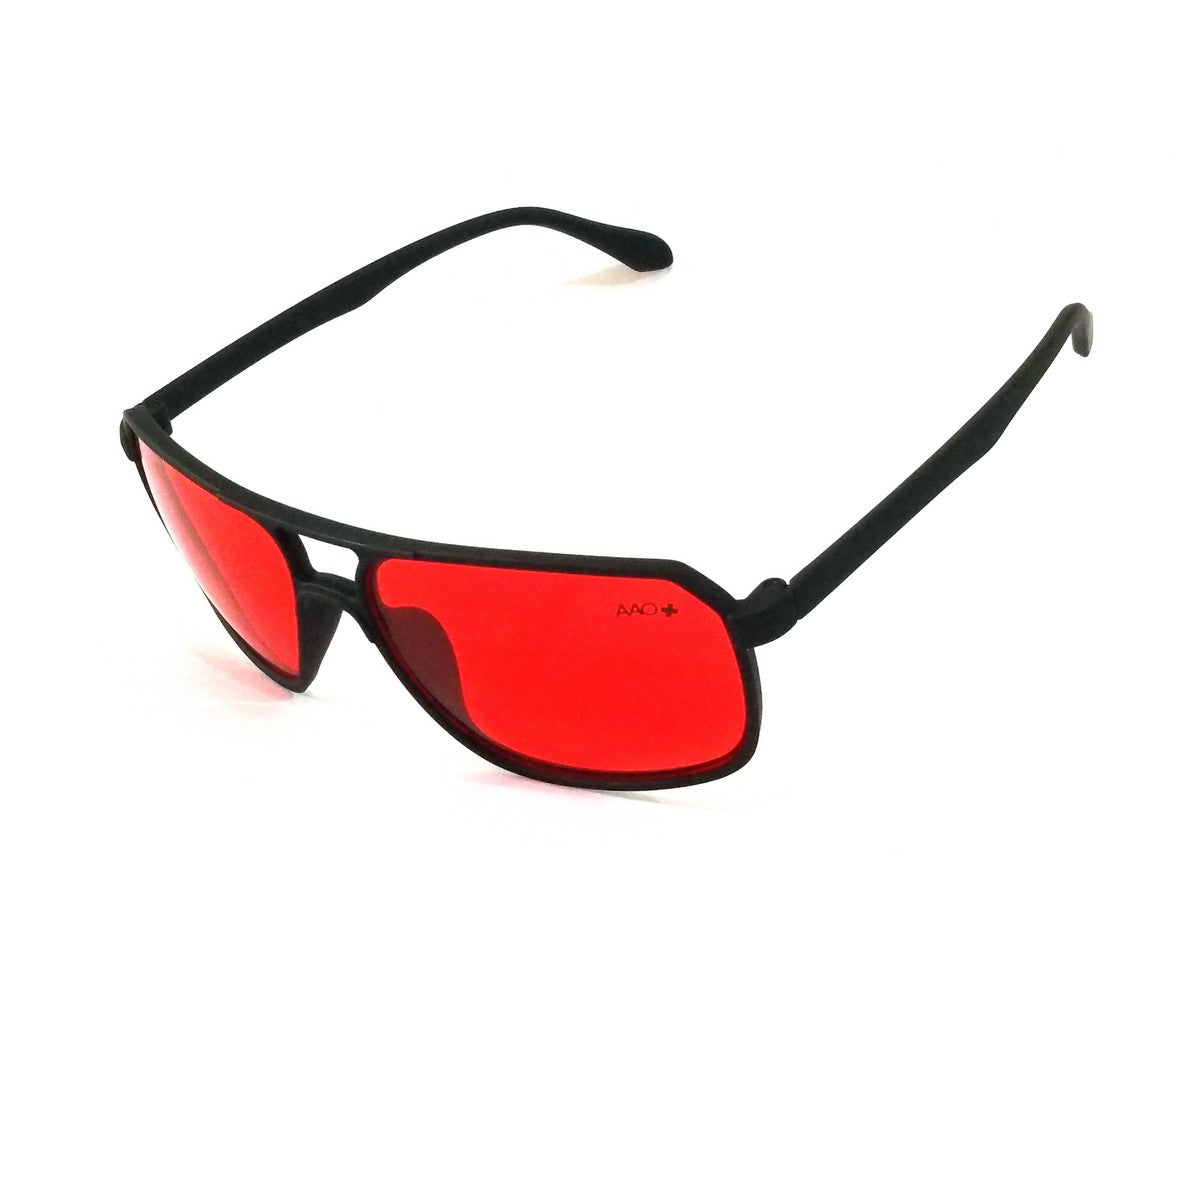 Buy ARZONAI Mens Oversized Sunglasses, Golden Frame, Red Lens (Large) Pack  of 1 at Amazon.in